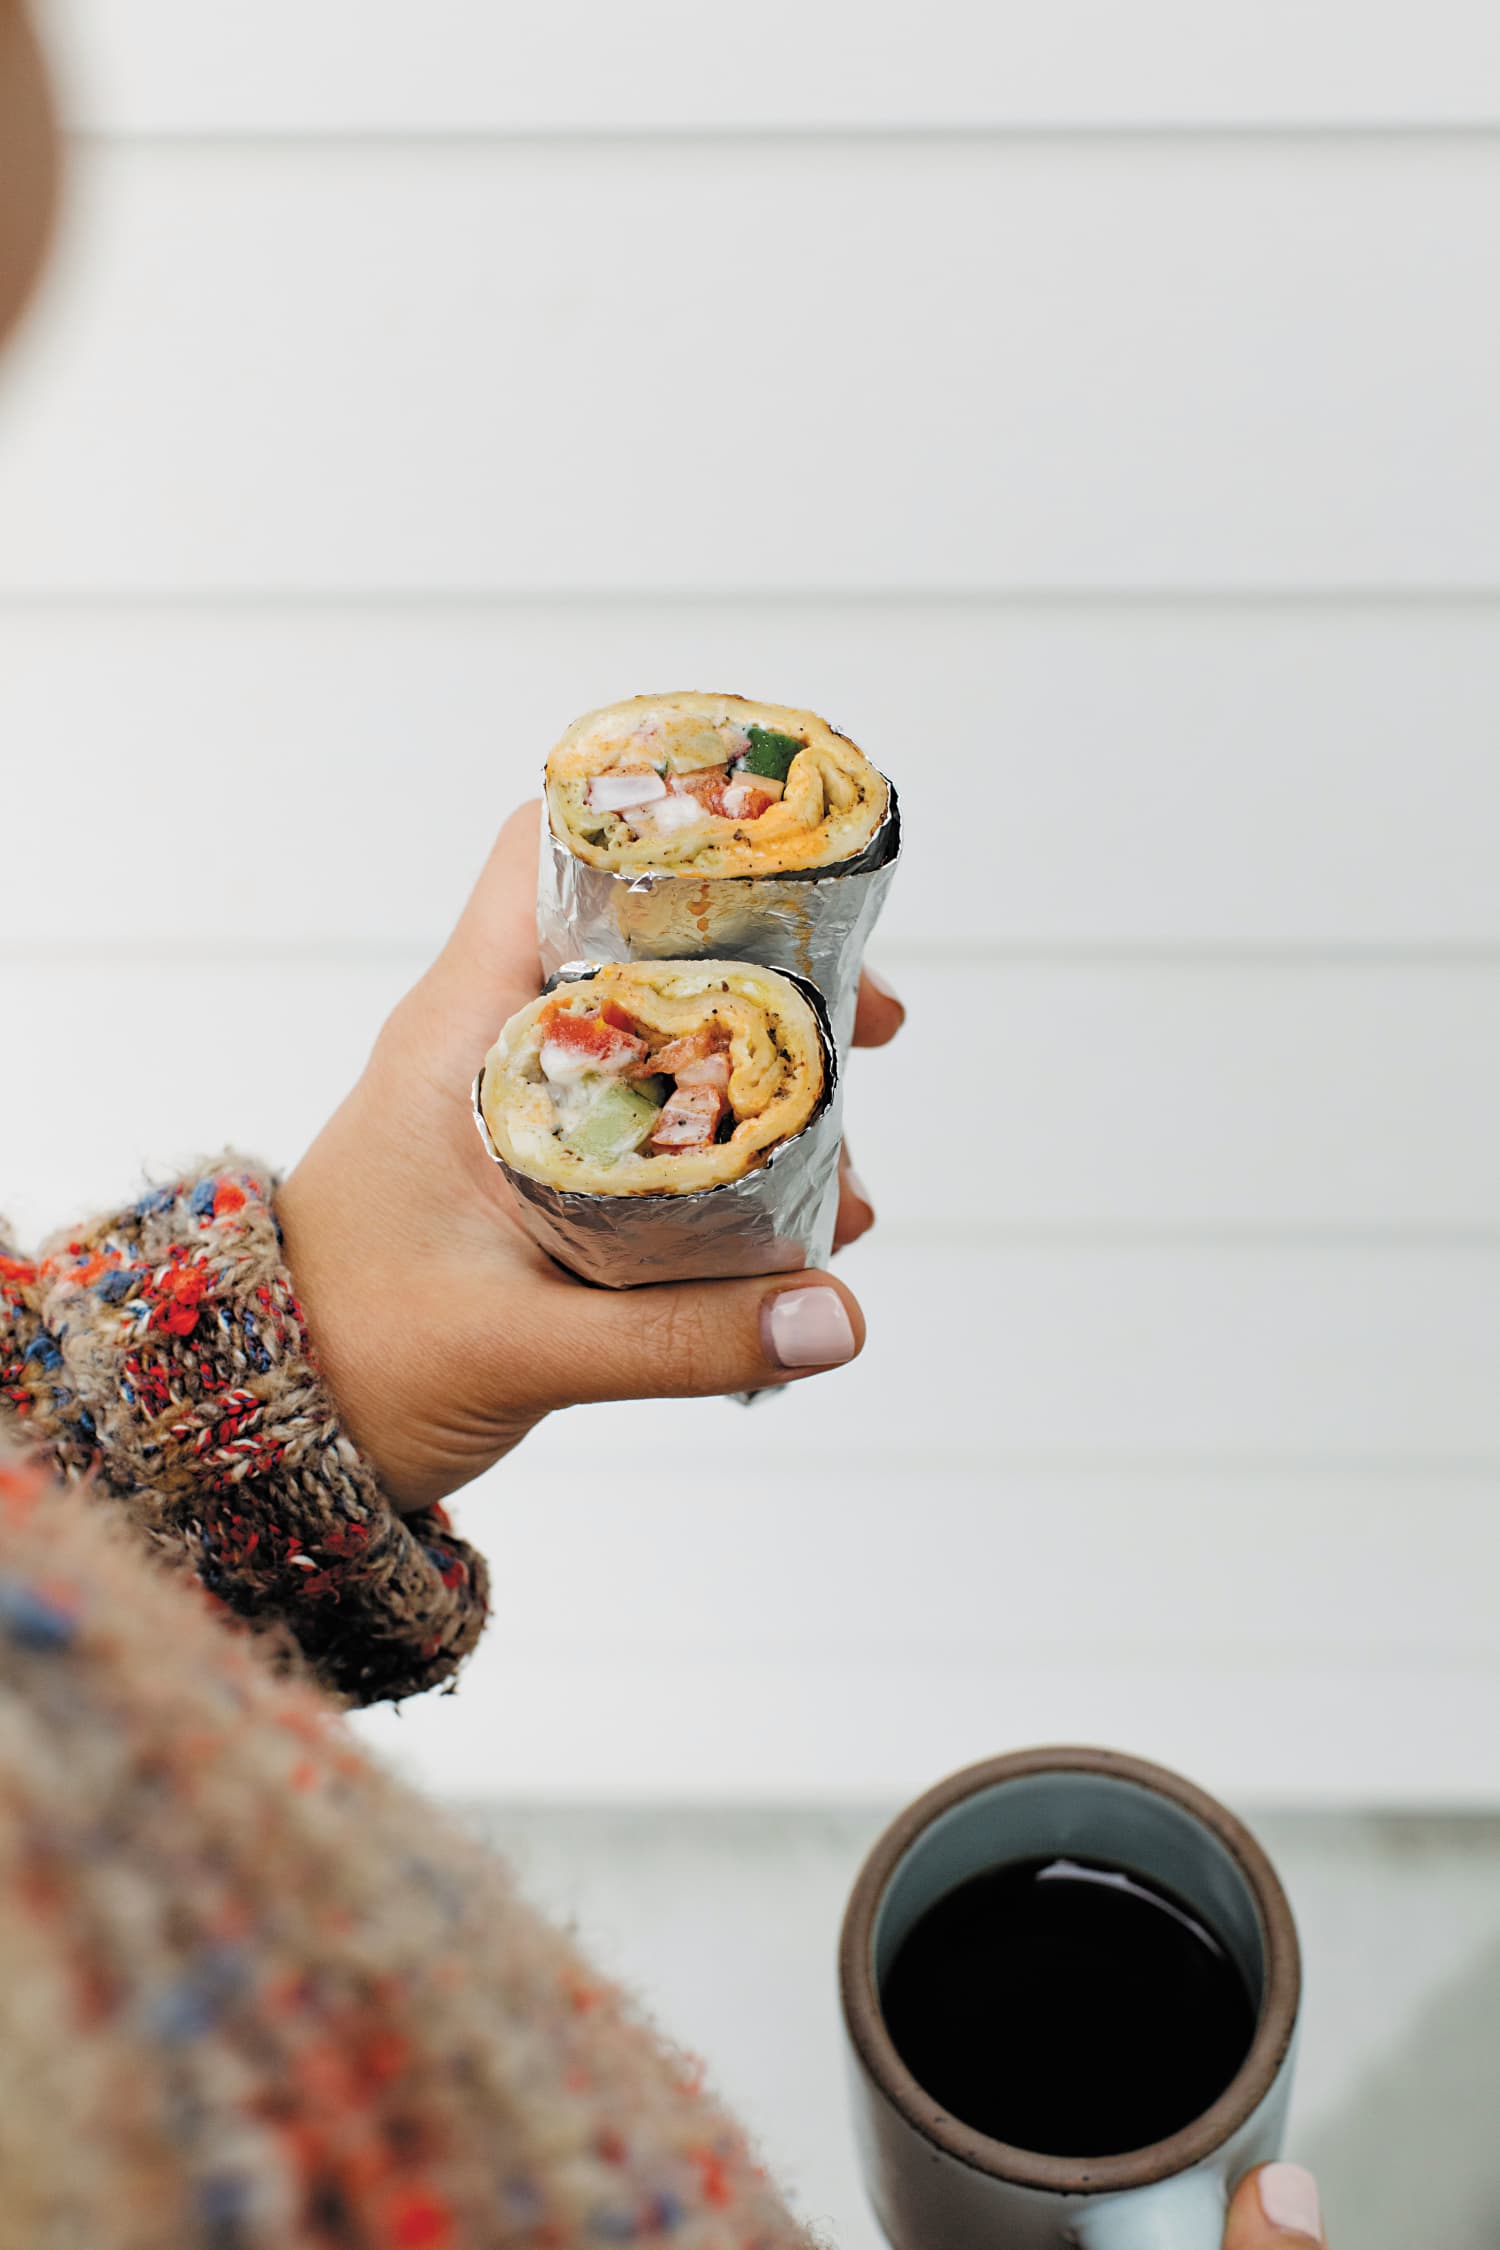 This Feta and Za'atar Omelet Roll-up Is the Perfect Portable Breakfast